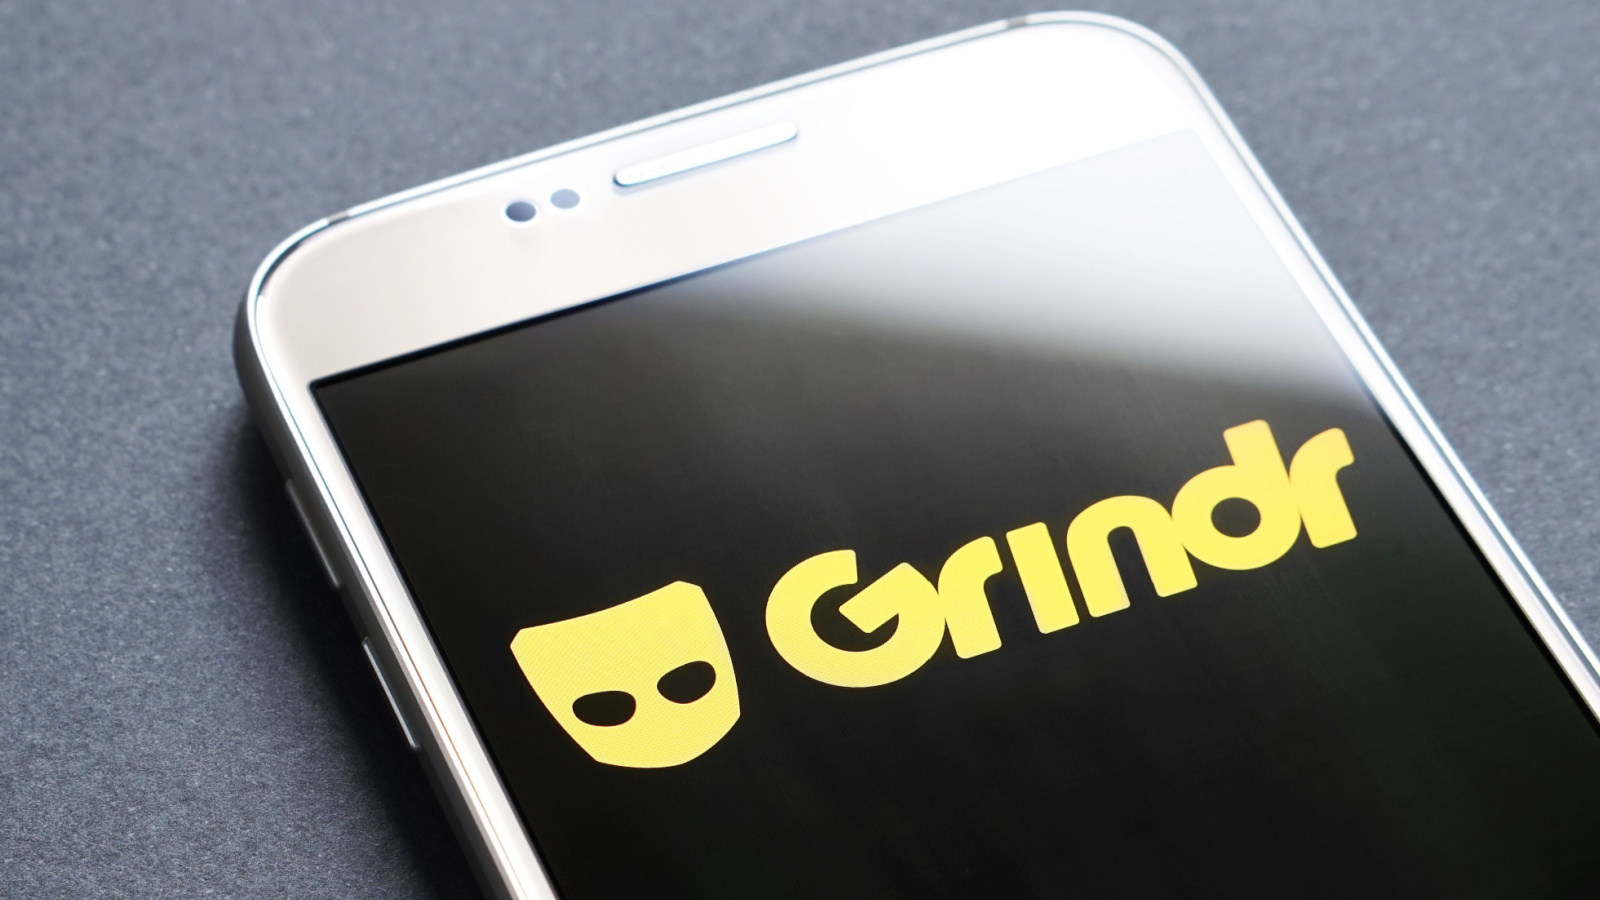 Yellow Grindr (GRND) logo displayed on smartphone against gray background